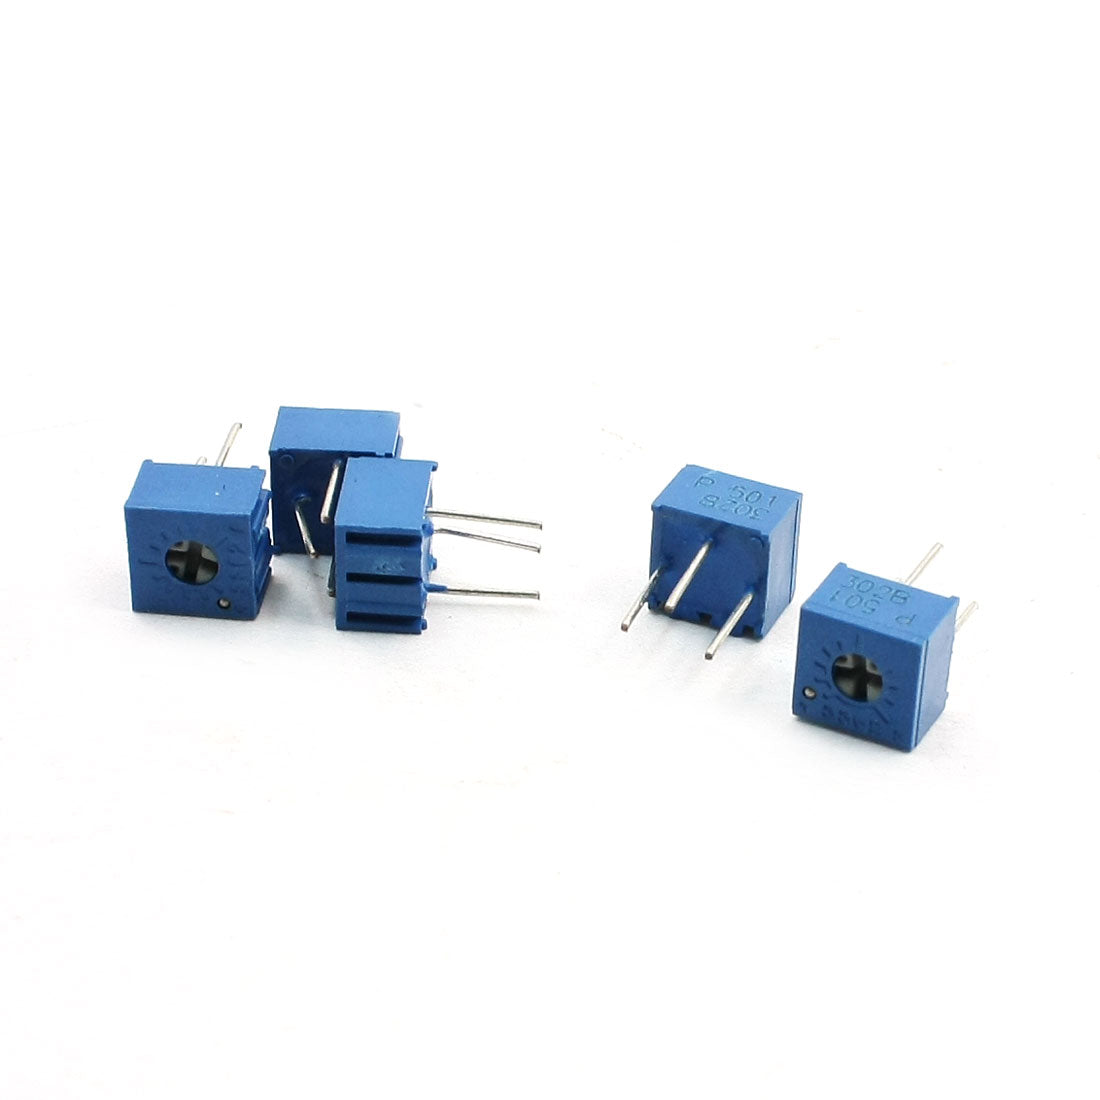 uxcell Uxcell a13082300ux1506 5 Piece 3362-501 500 Ohm 503 Cermet Trimmer Potentiometer